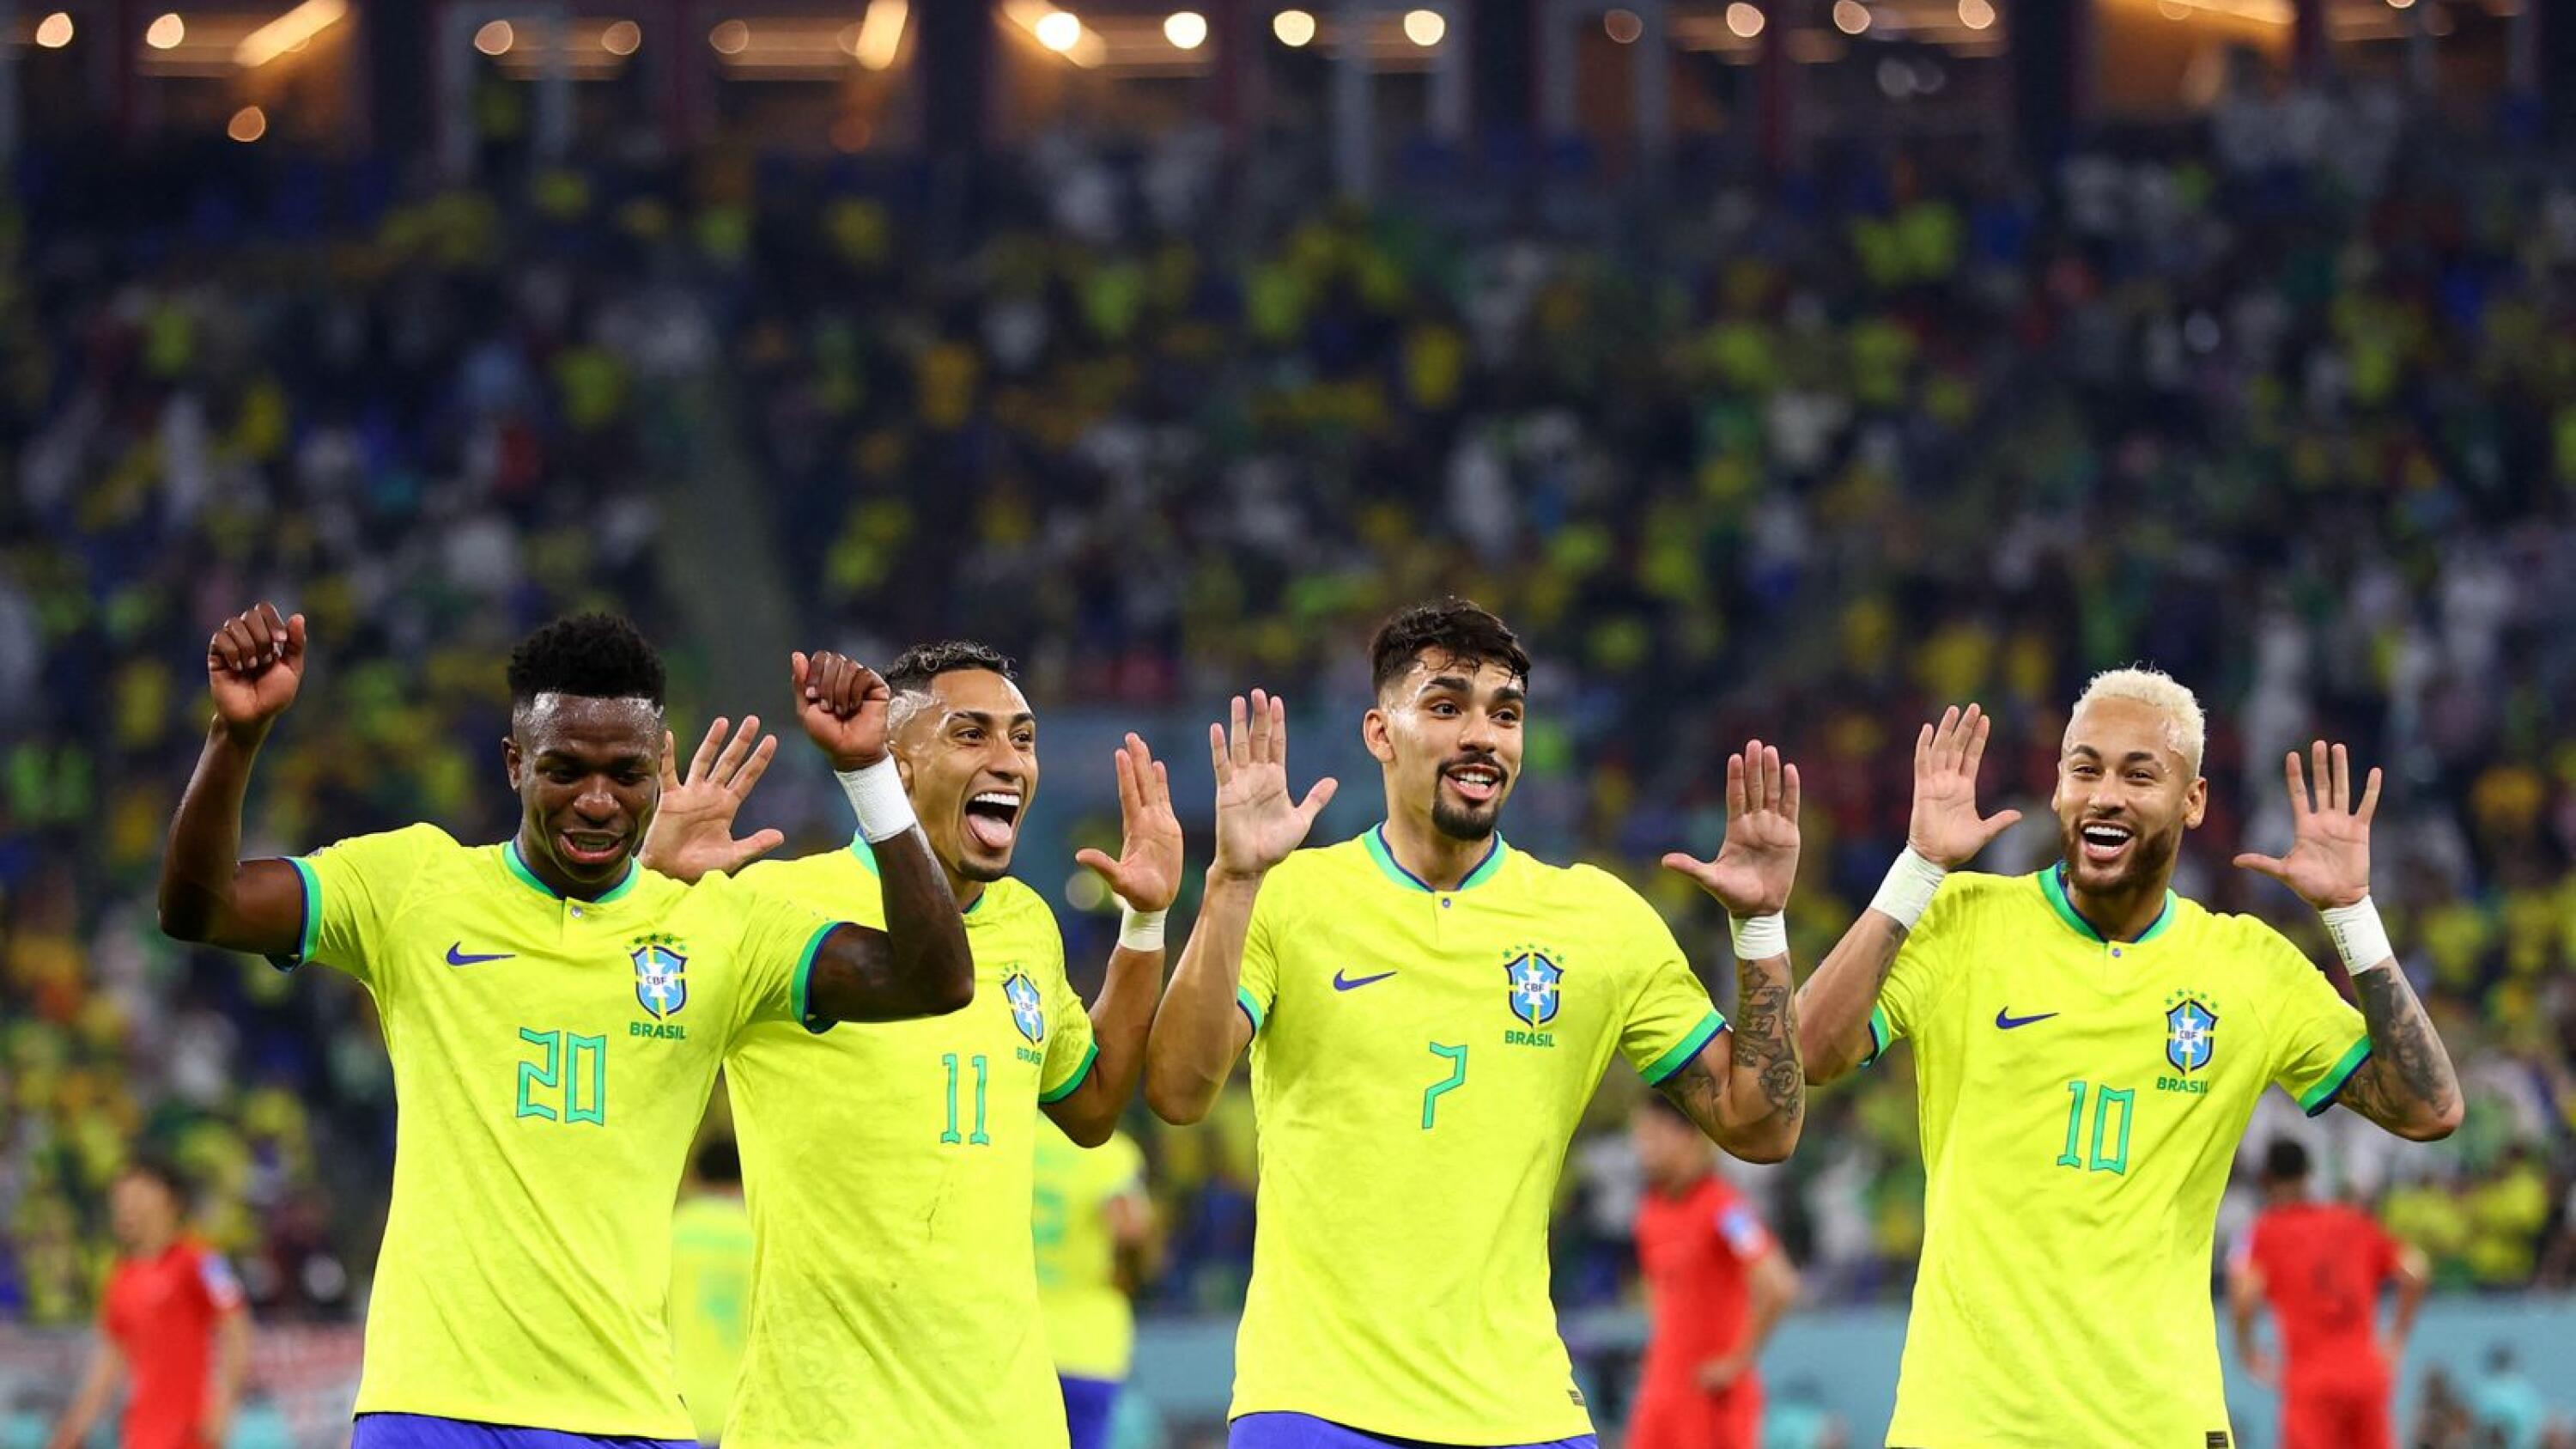 Brazil's Junior plays down favourites tag in World Cup clash with Croatia